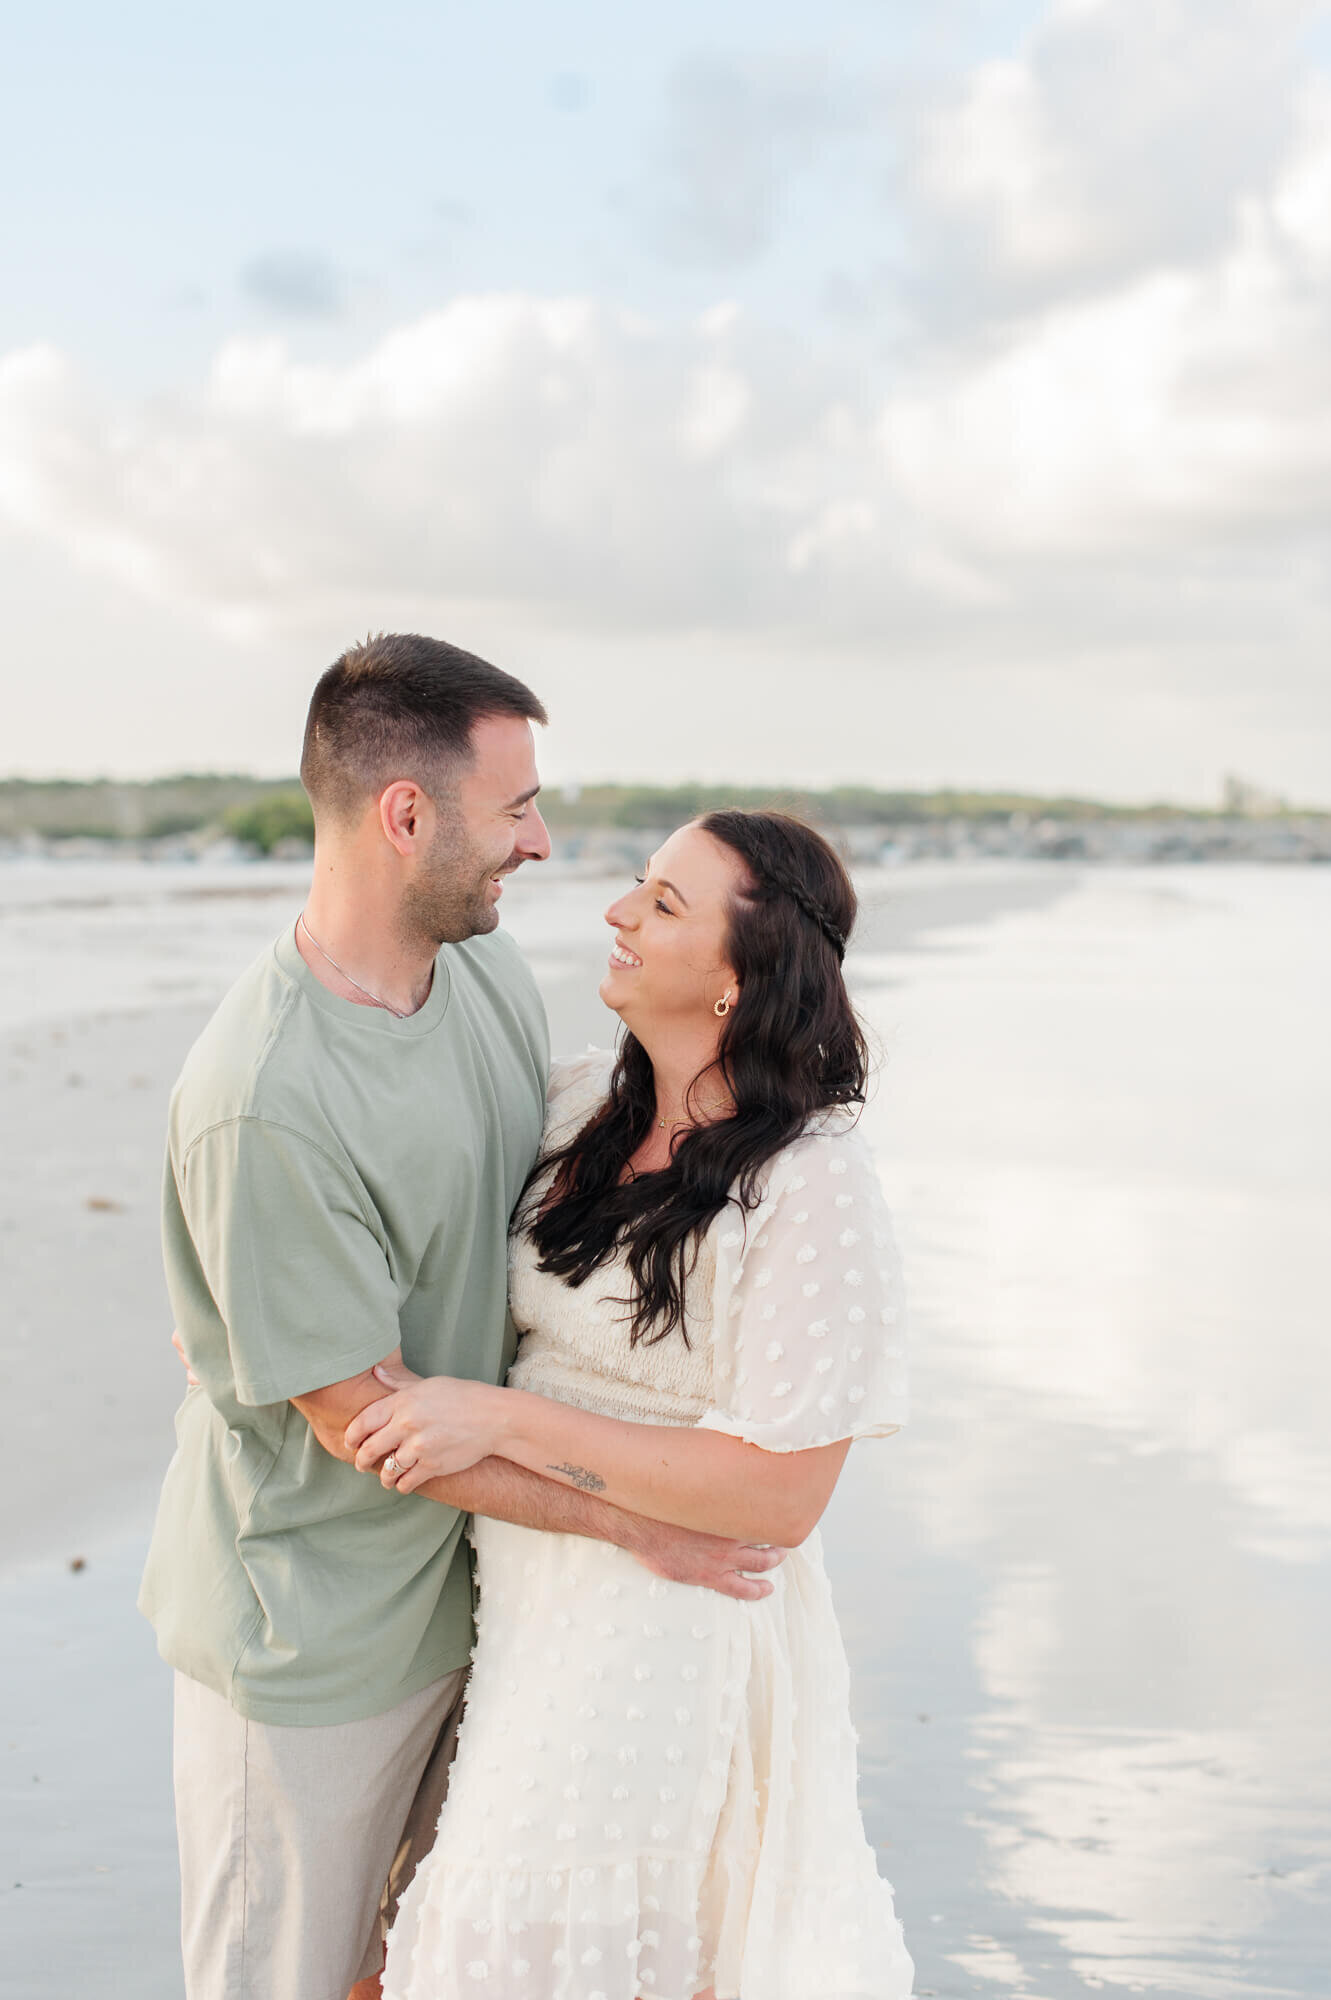 Couple holding each other and smiling during their photography session on the beach